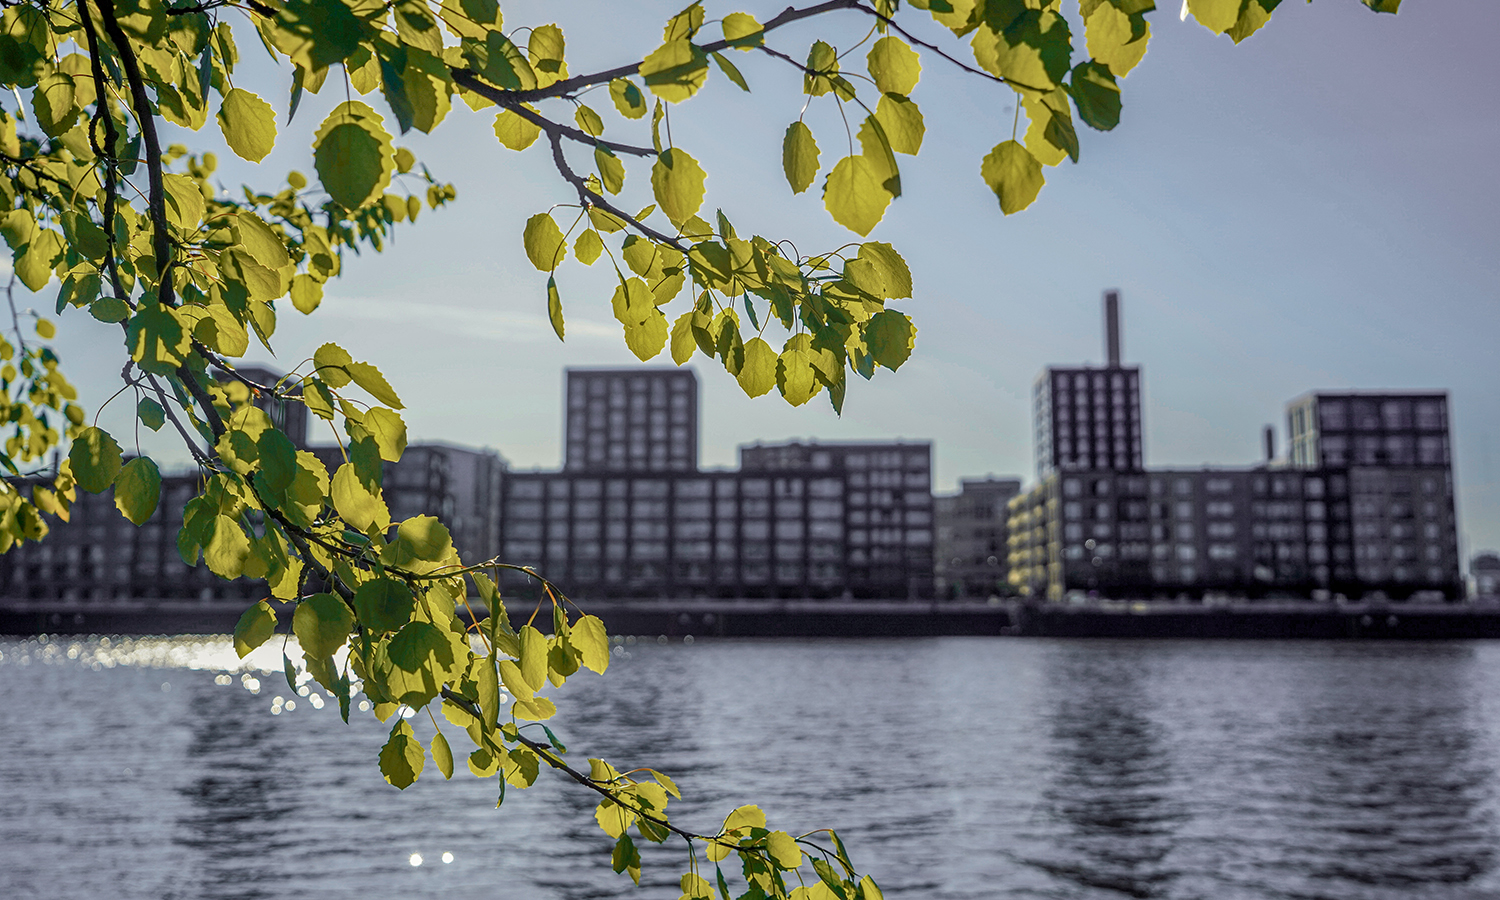 A summer view from Helsinki's Mustikkamaa island towards Kalasatama with residential buildings behind a birch branch in the foreground.